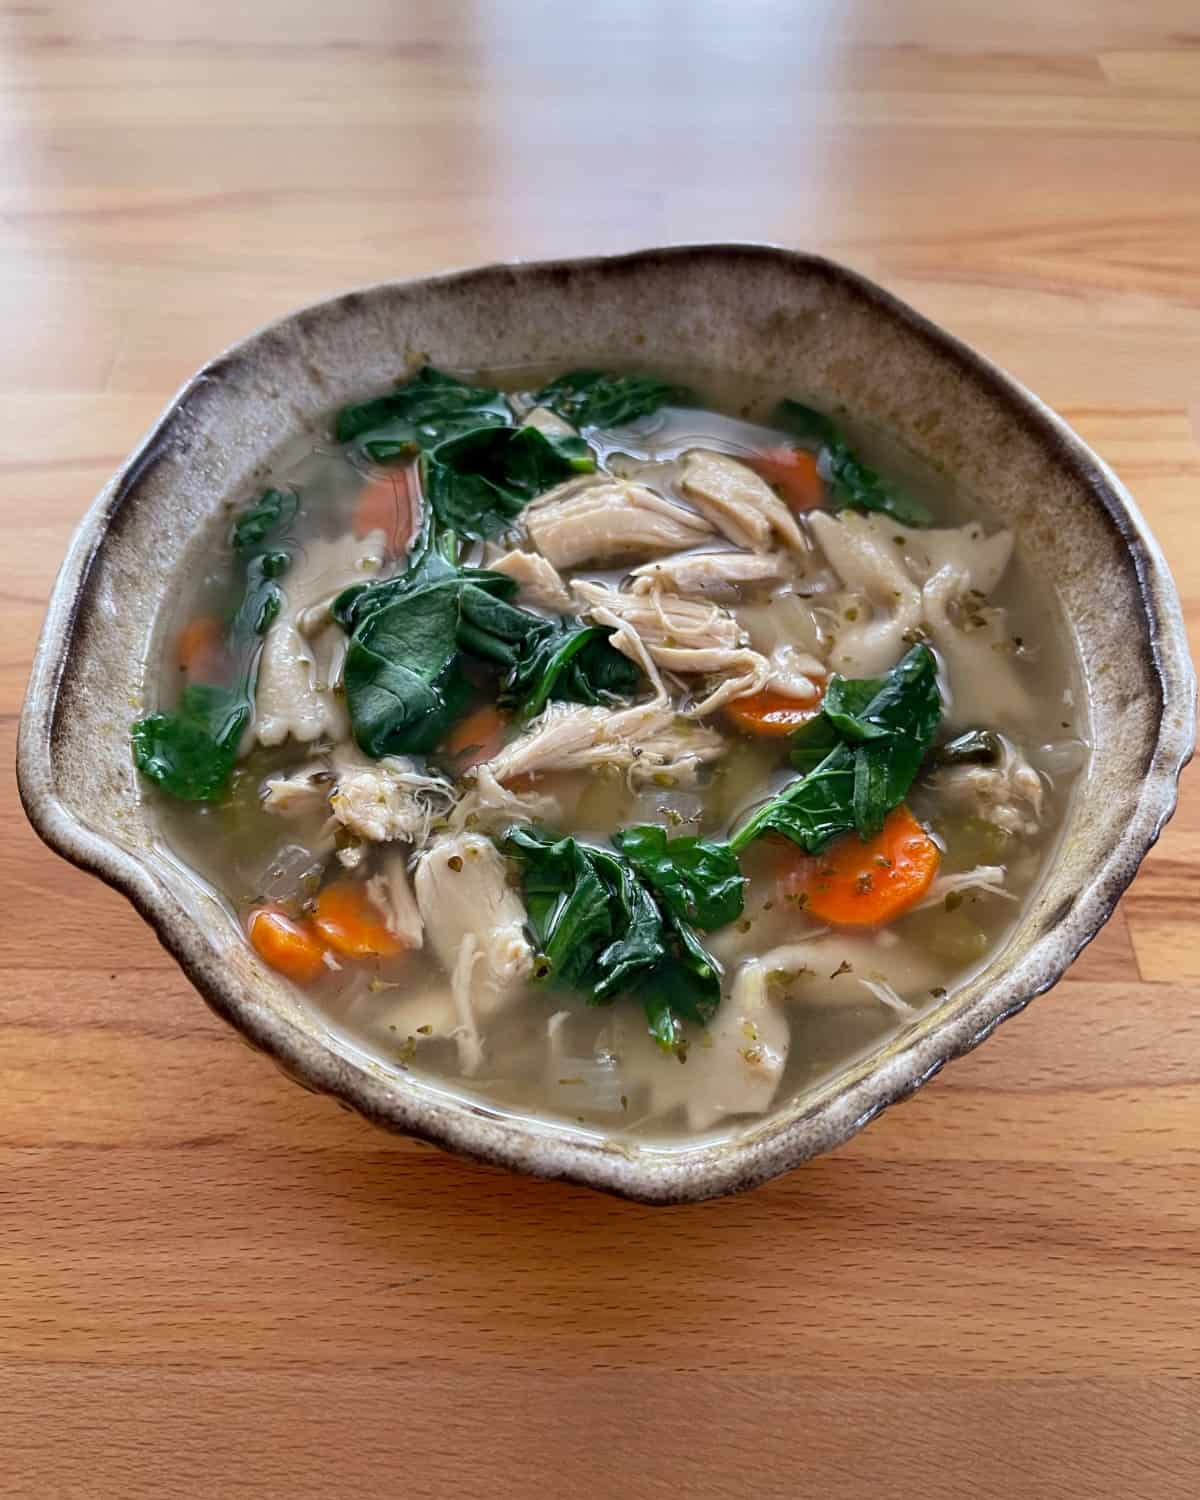 Tuscan chicken pasta soup in ceramic bowl on wooden table.